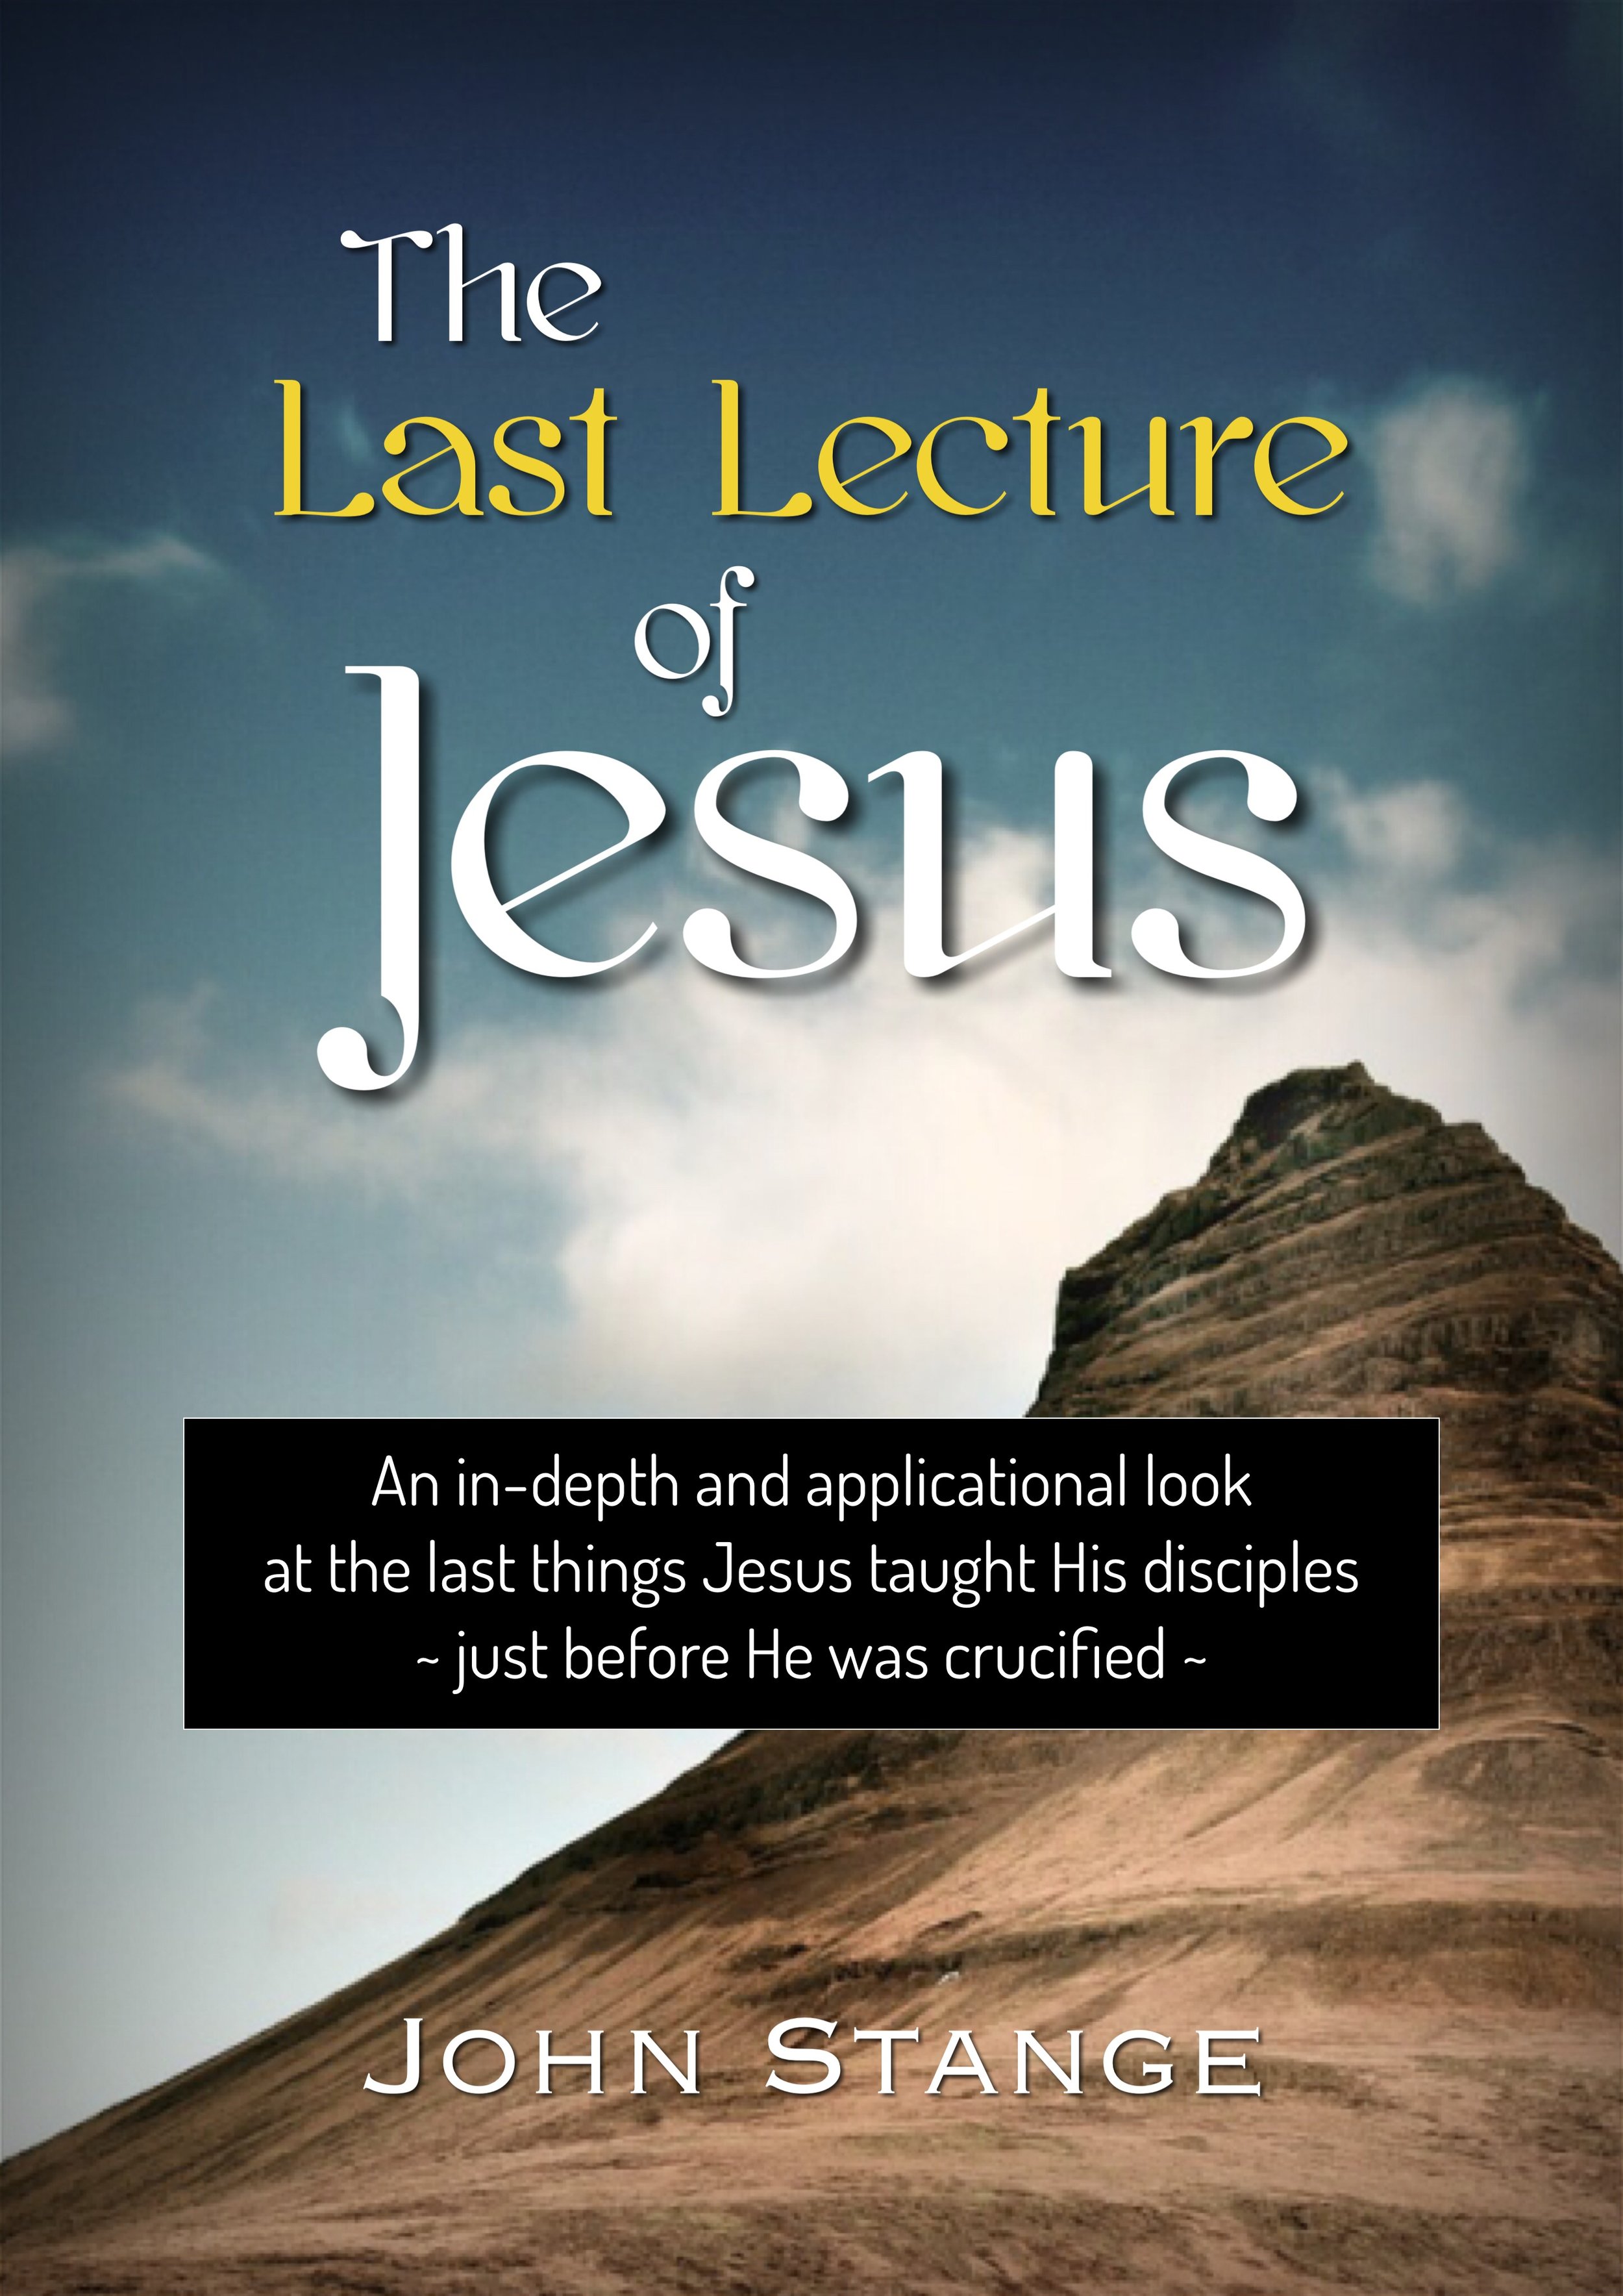 The Last Lecture of Jesus.JPG